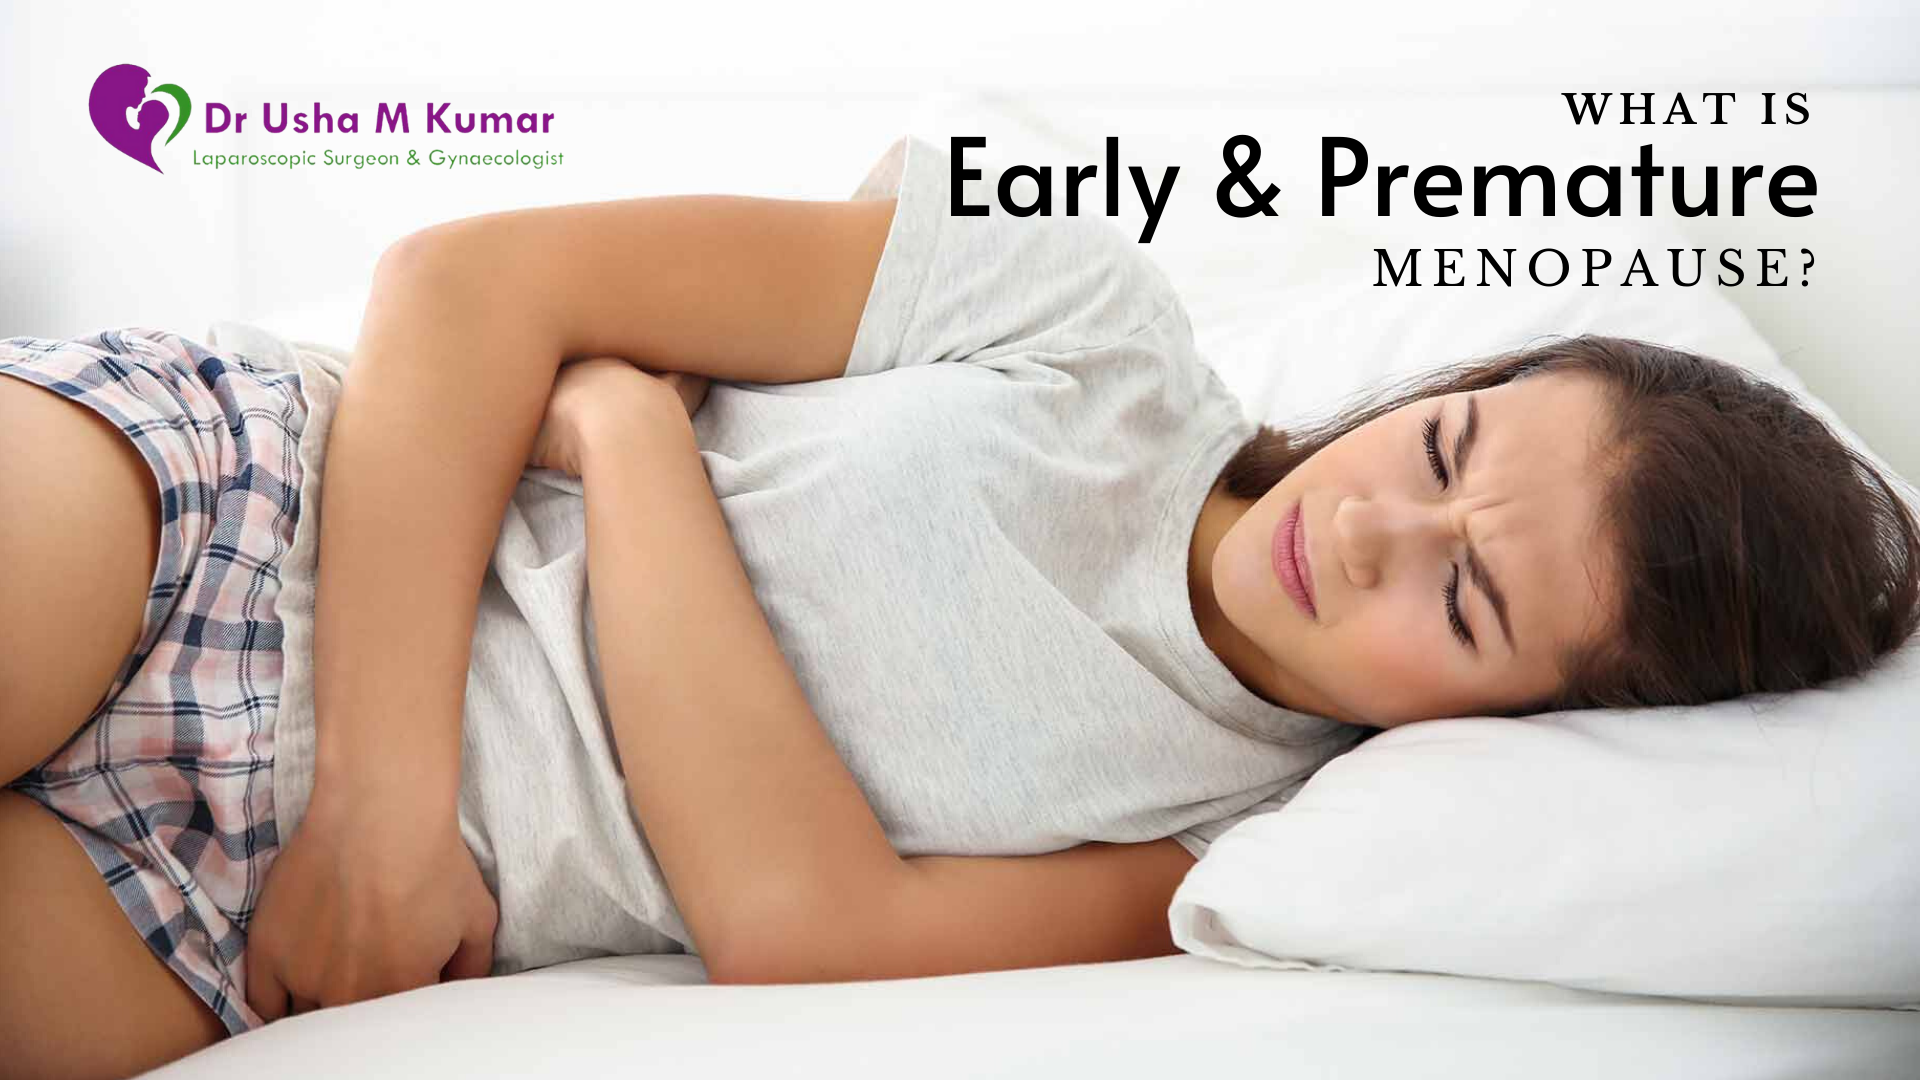 Female gynecologist near me -Early & premature menopause